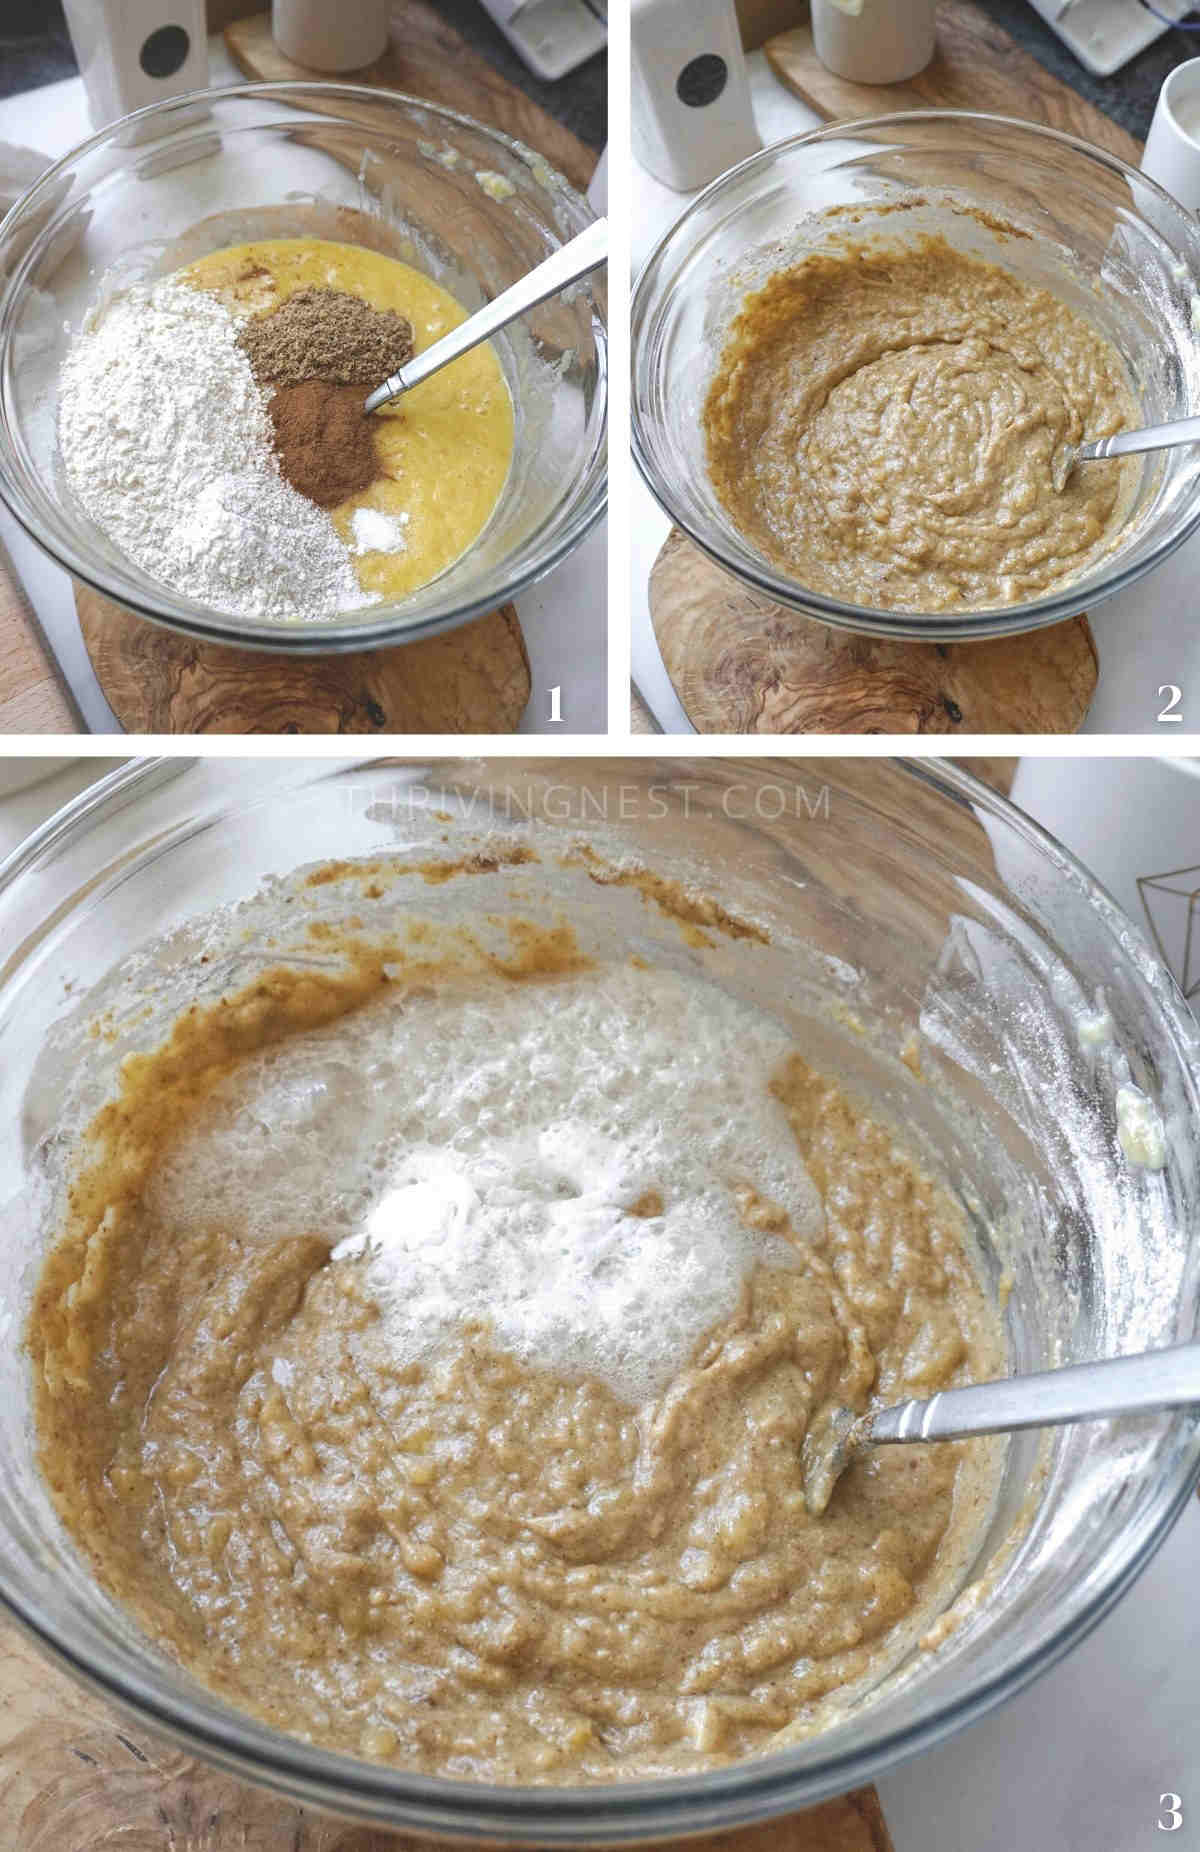 Process shots showing dry ingredients and the addition of baking soda and lemon juice for leavening.